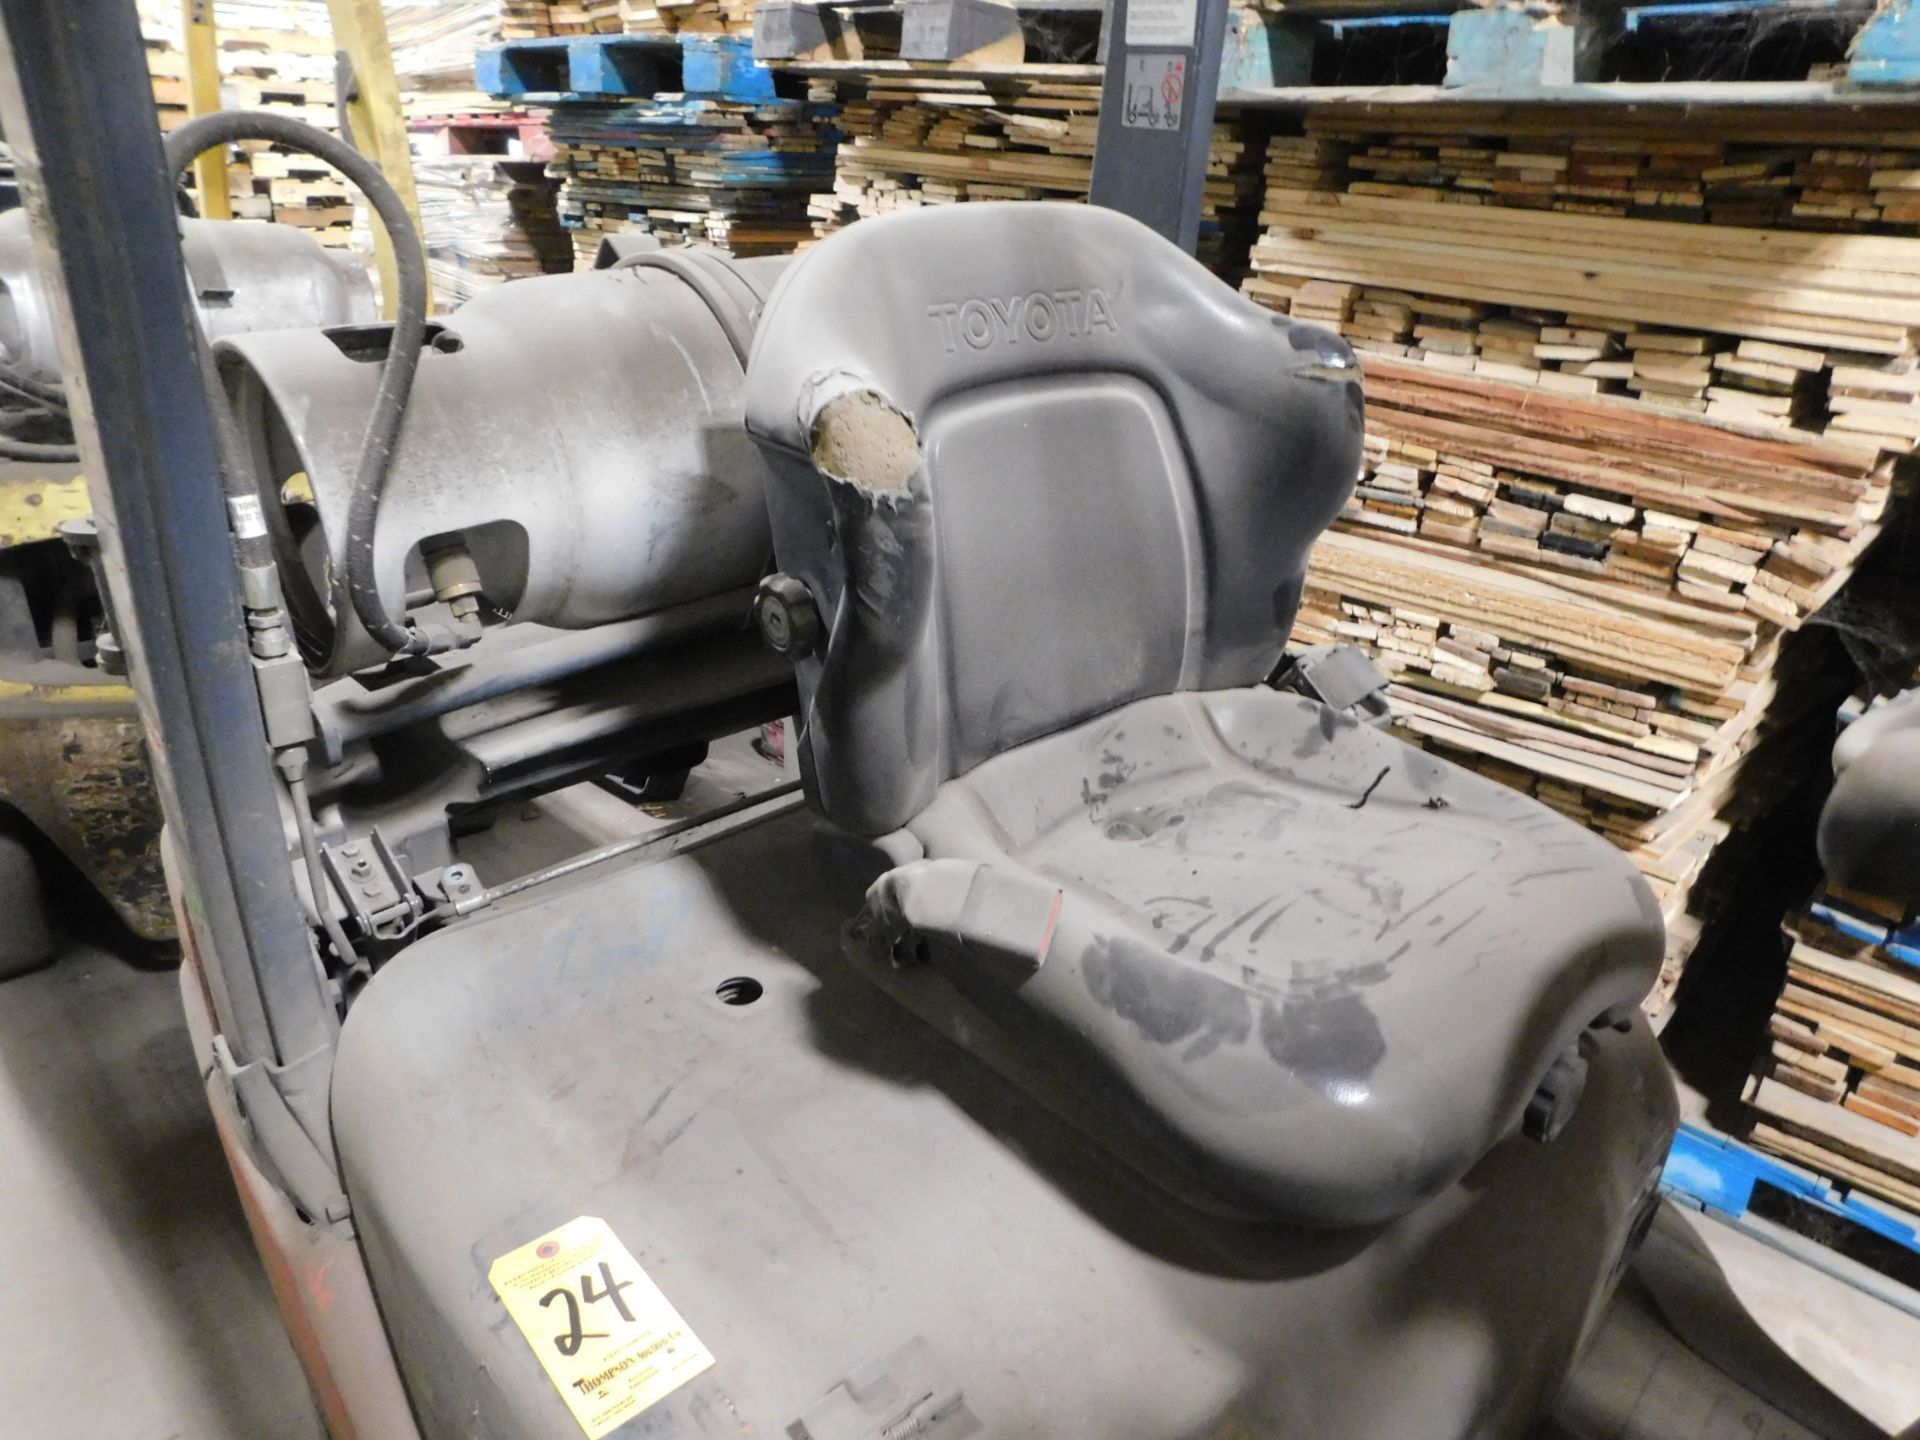 Toyota 8FGU15 Fork Lift Truck, SN 64667, Not In Running Condition, Hours NA - Image 2 of 6